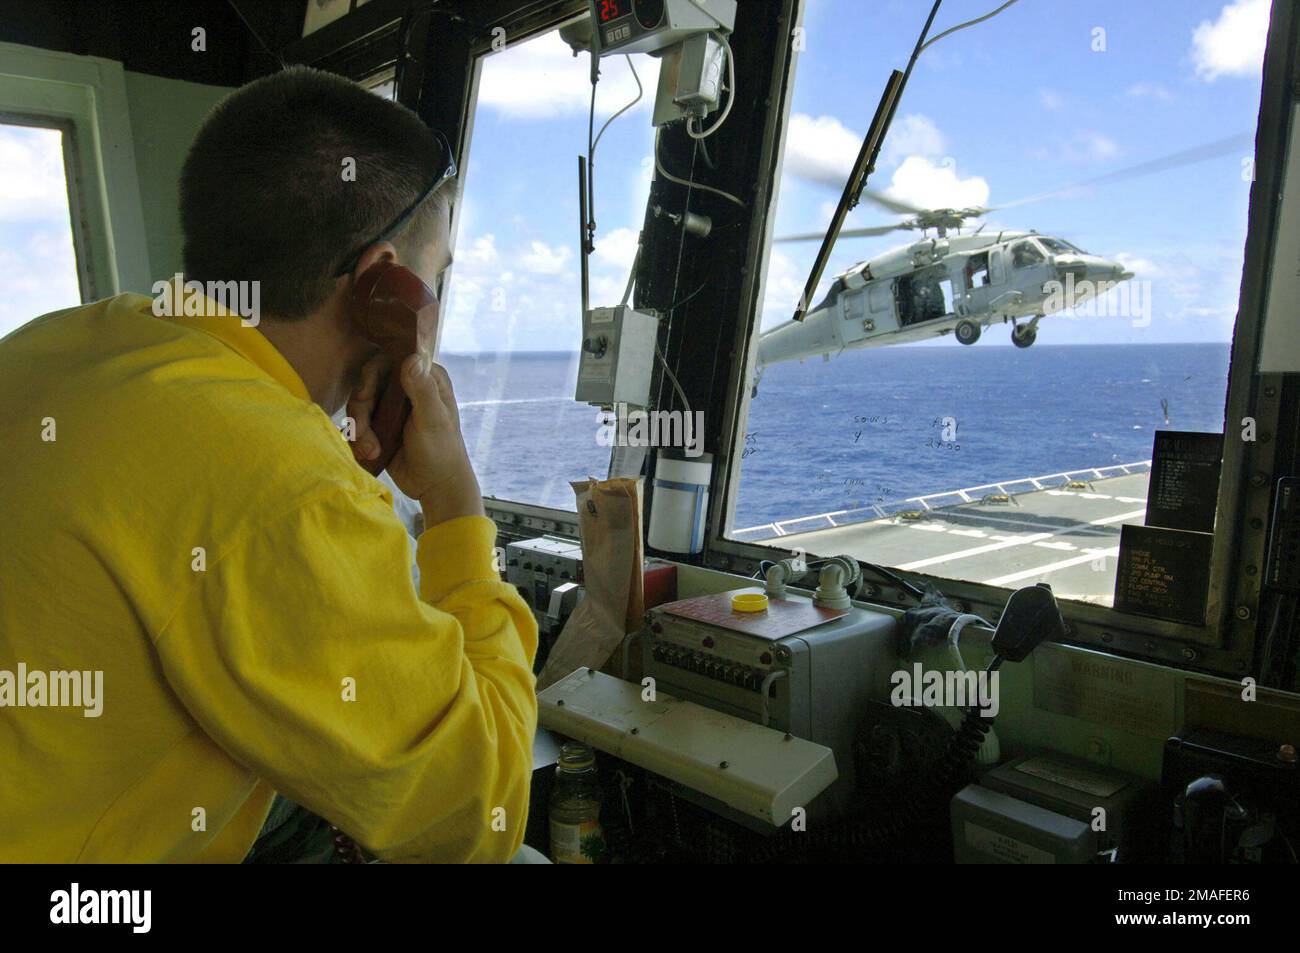 060514-N-6501M-002. [Complete] Scene Caption: US Navy (USN) Aviation Boatswain's Mate Second Class (AB2) Zachary L. Dabney monitors the arrival of aUSN MH-60S Sea Hawk helicopter, assigned to Helicopter Sea Combat Squadron 25 (HSC-25), as it delivers supplies to the flight deck aboard the USN Military Sealift Command (MSC), Hospital Ship, USNS MERCY (T-AH 19), during a Replenishment at Sea (RAS) evolution with the USN MSC Mars Class: Combat Stores Ship, USNS CONCORD (T- AFS 5). The USNS MERCY is currently underway in the Pacific Ocean, conducting a scheduled five-month deployment to deliver ai Stock Photo